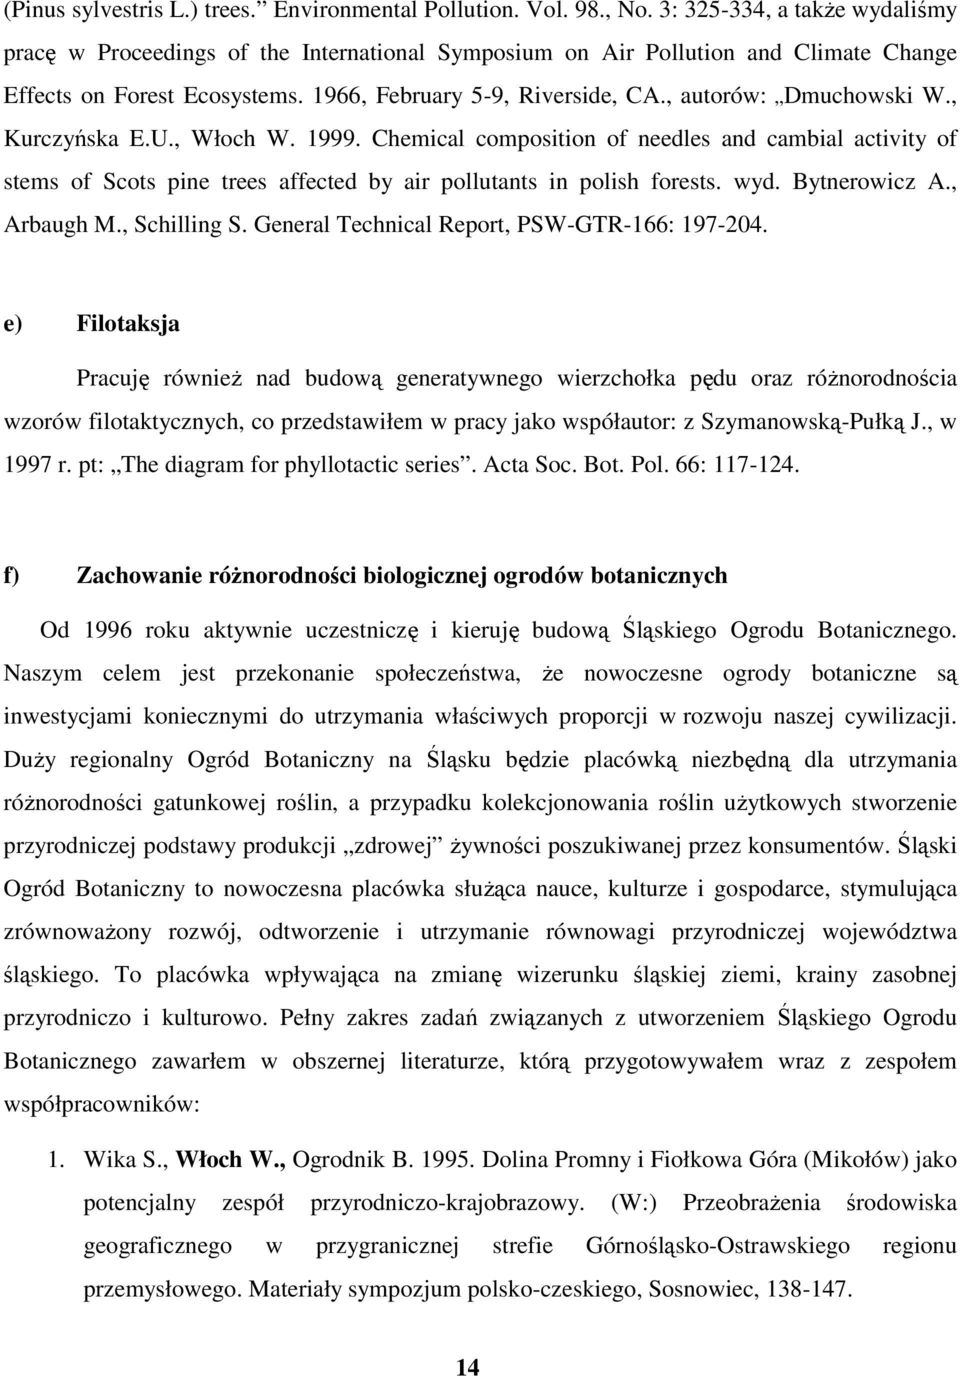 , autorów: Dmuchowski W., Kurczyńska E.U., Włoch W. 1999. Chemical composition of needles and cambial activity of stems of Scots pine trees affected by air pollutants in polish forests. wyd.